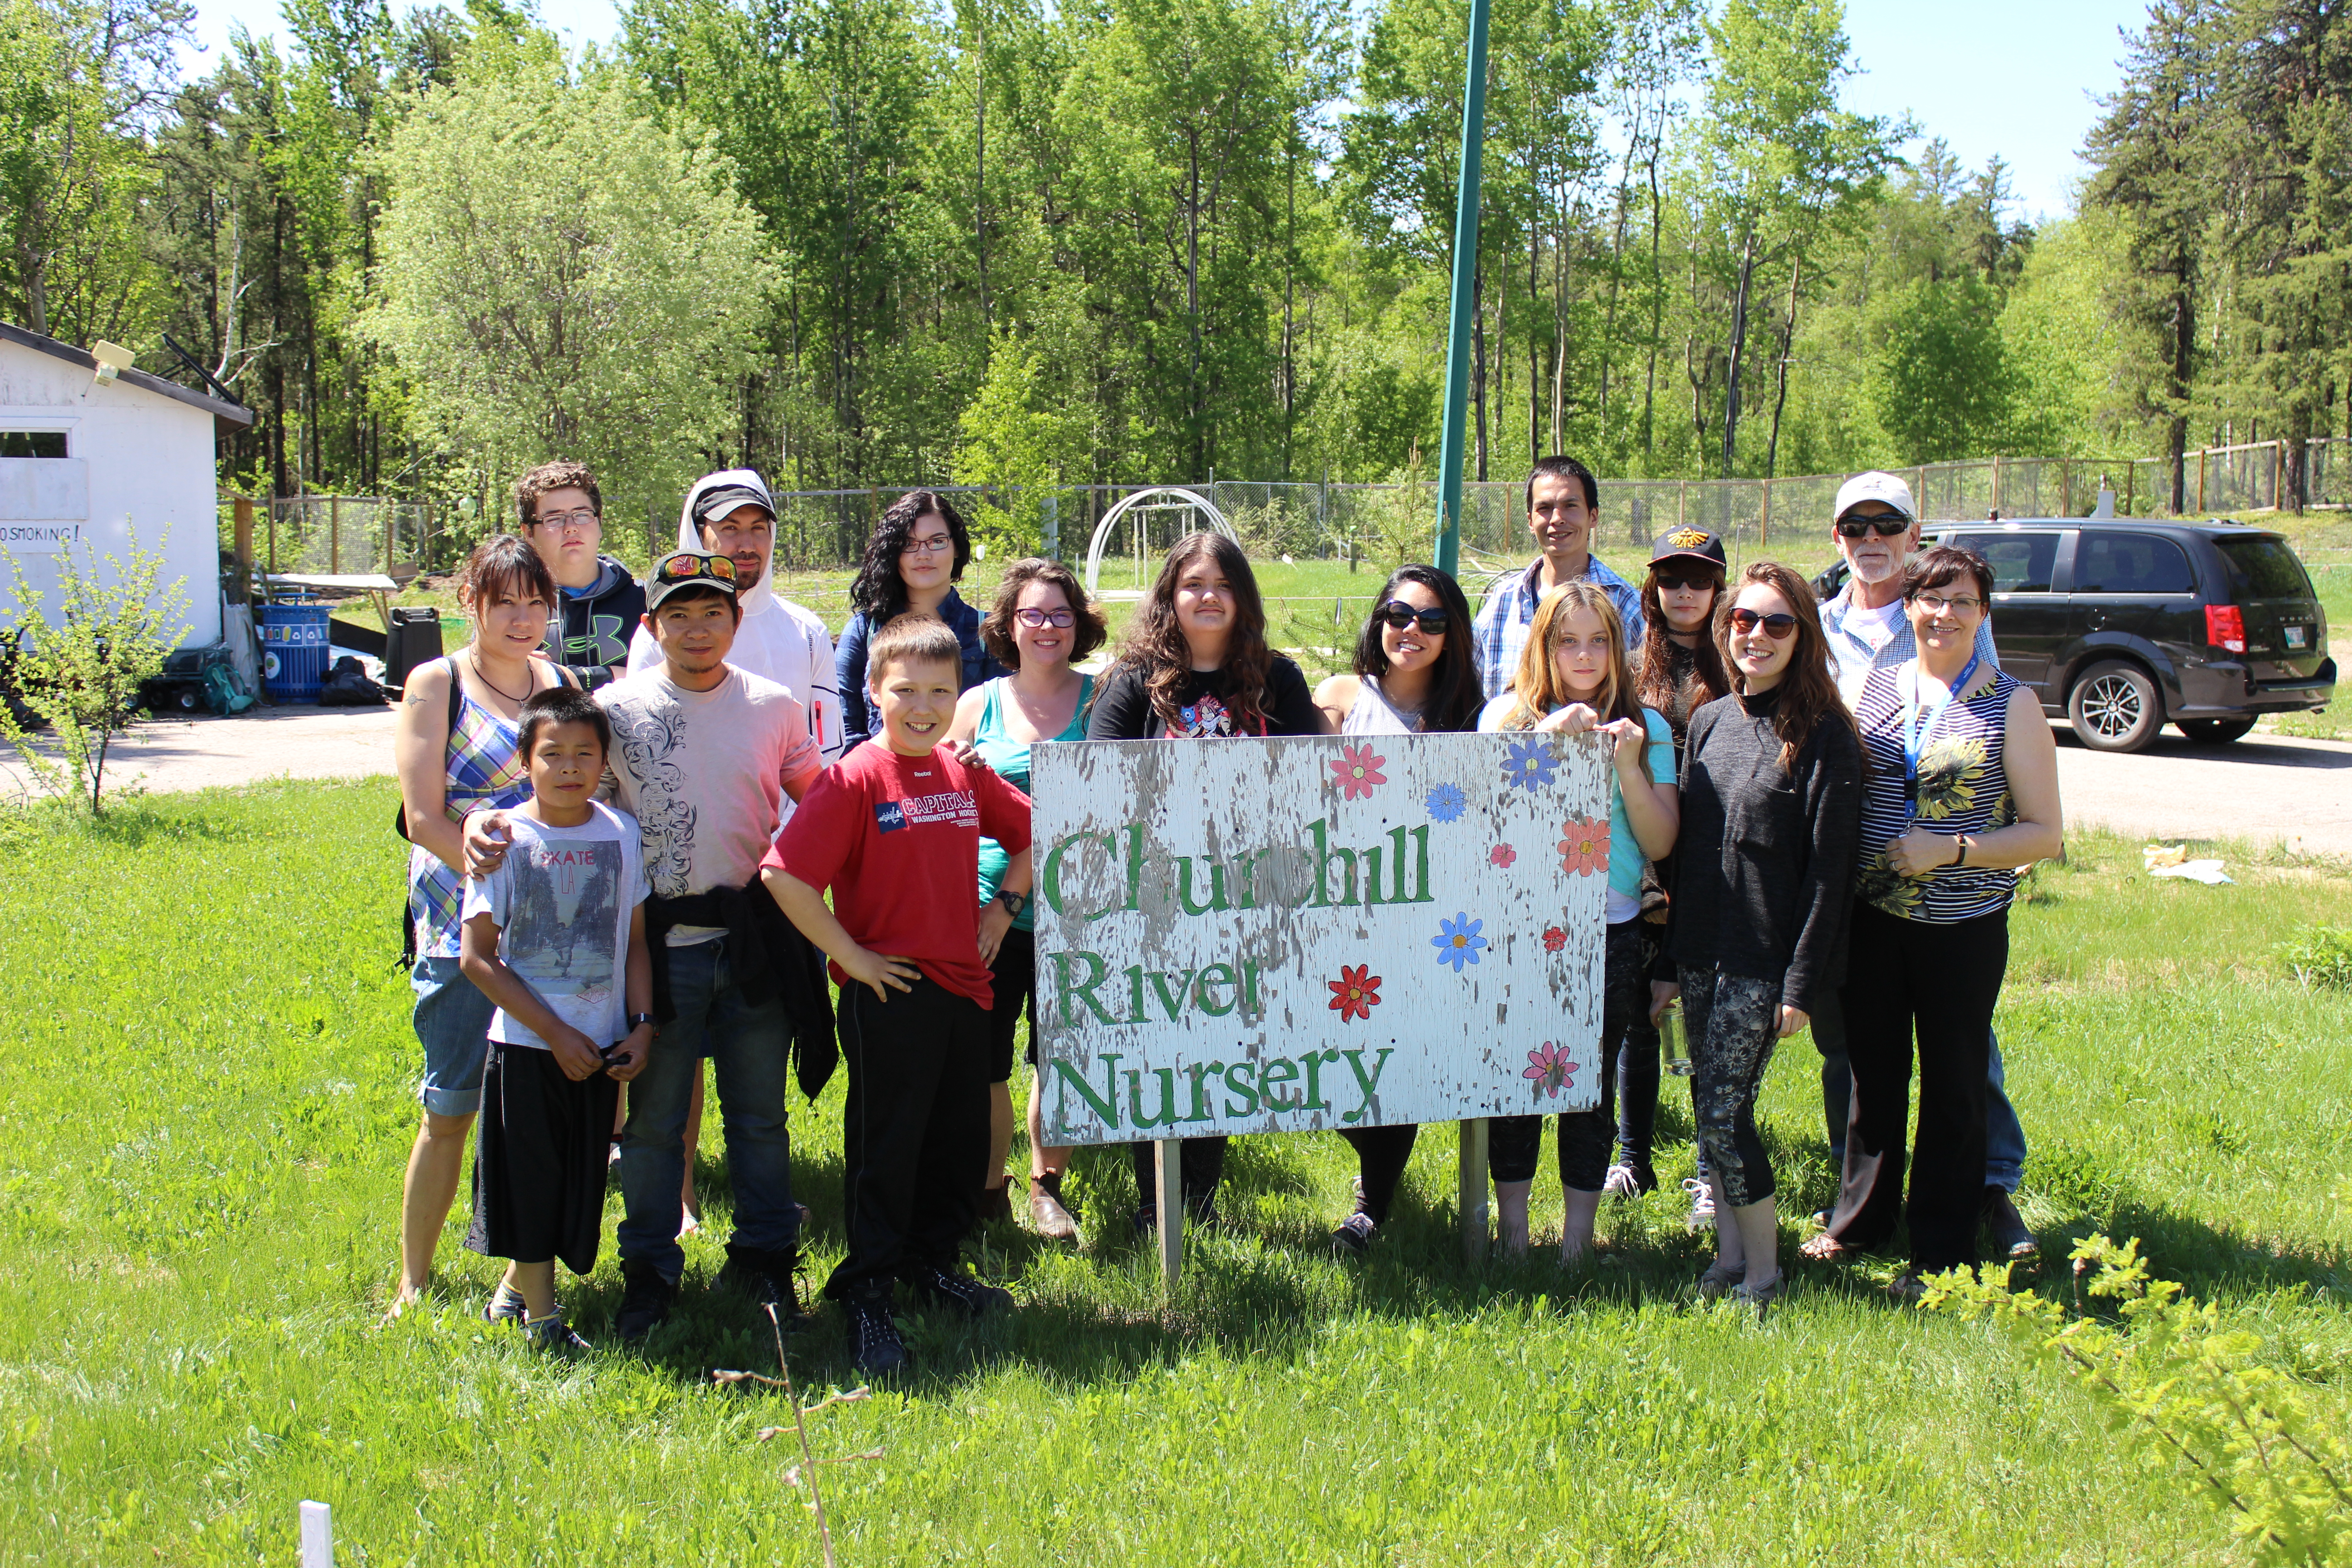 Churchill River Nursery, used for research and education, was developed by local youth